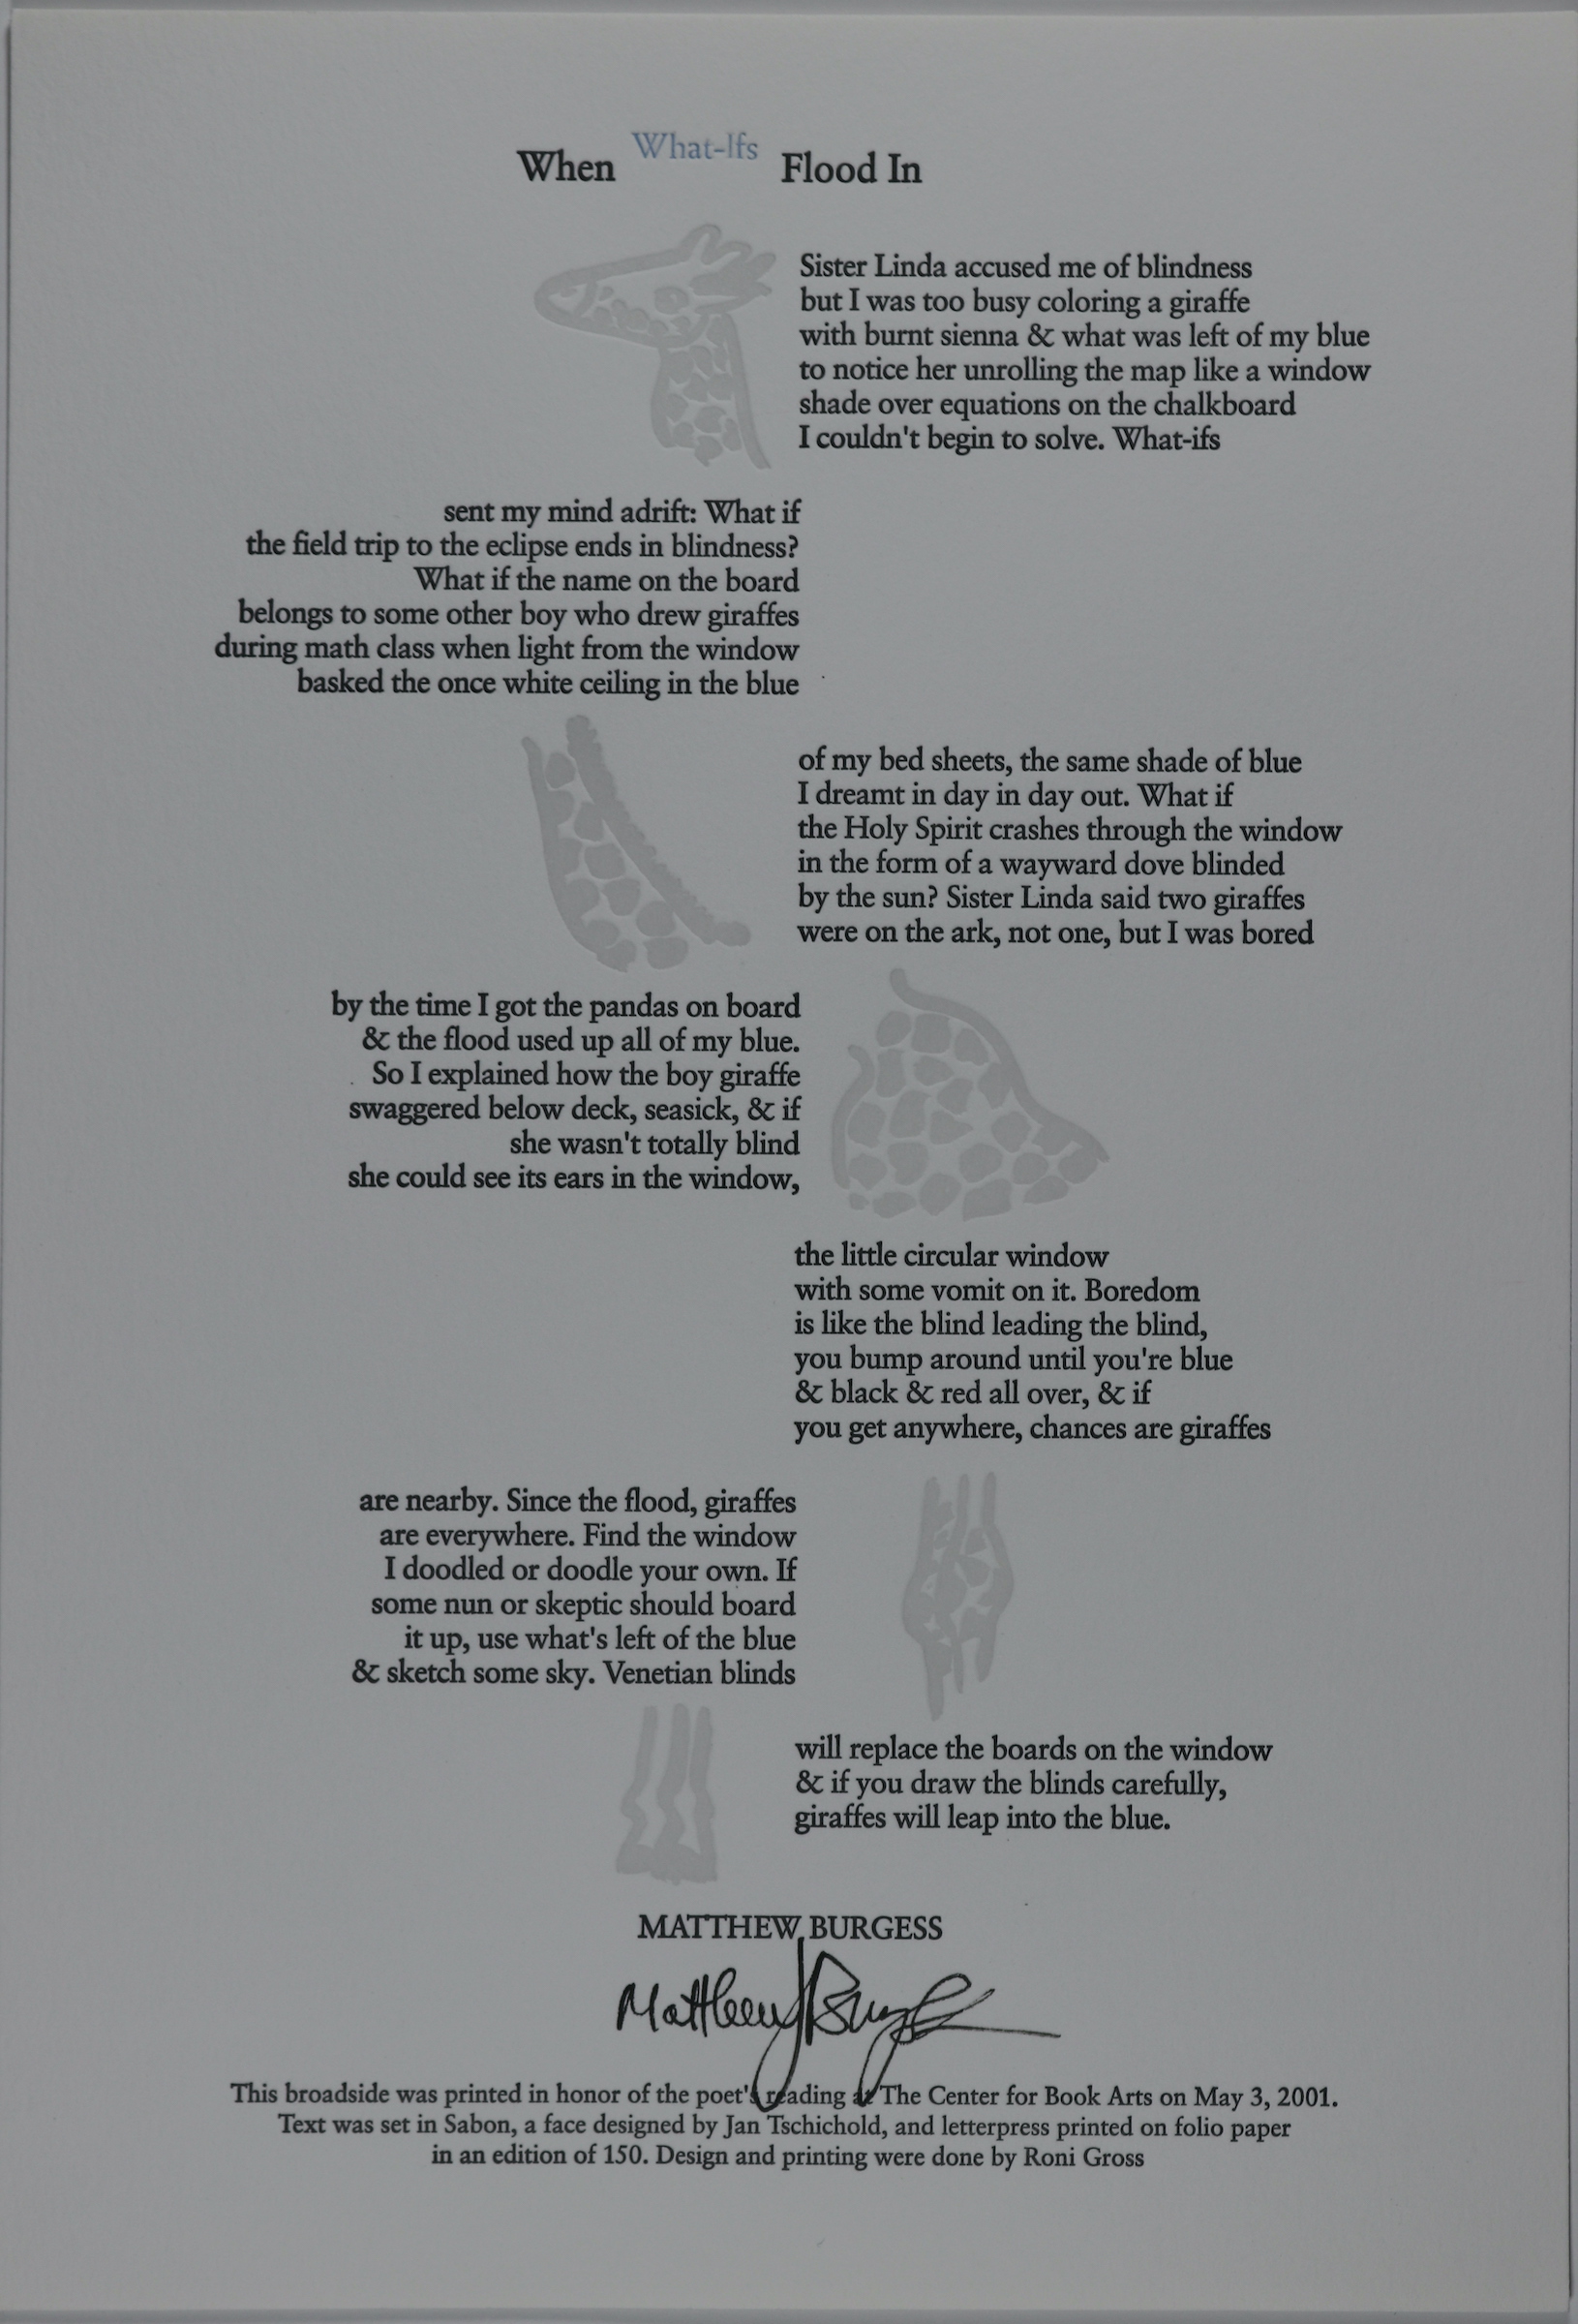 Broadside is long and rectangular in size, with a white colored background. The title is high above on the broadside, small in font and colored black. The words “what if’s” are in blue and slightly raised above the rest of the black ones. The text is centered in the middle of the broadside, formatted into paragraphs, with seven in total. The text color is also black, and the paragraphs themselves are placed where one paragraph is on the right side, then the next one to the left, like zig-zagging in place. In between the spaces that the paragraphs don’t take up, in the center, is a design of a giraffe in light gray. The giraffe’s body is sectioned off by each paragraph, so the design is in pieces, from the head of the animal to the legs.